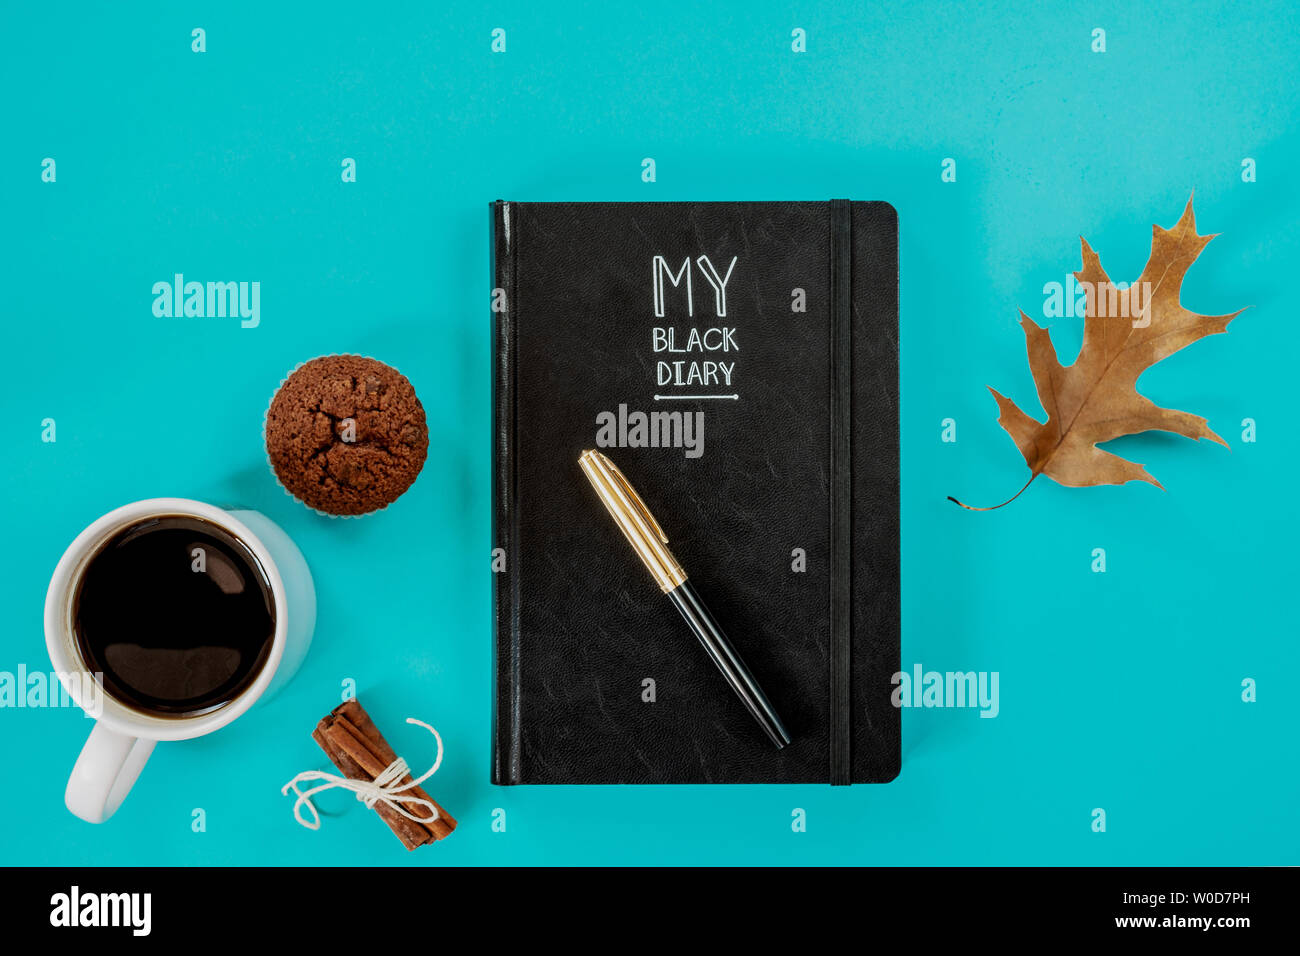 Working concept. Diary, pen, cup of coffee, muffin and fallen leaf on blue background. Top view. Stock Photo